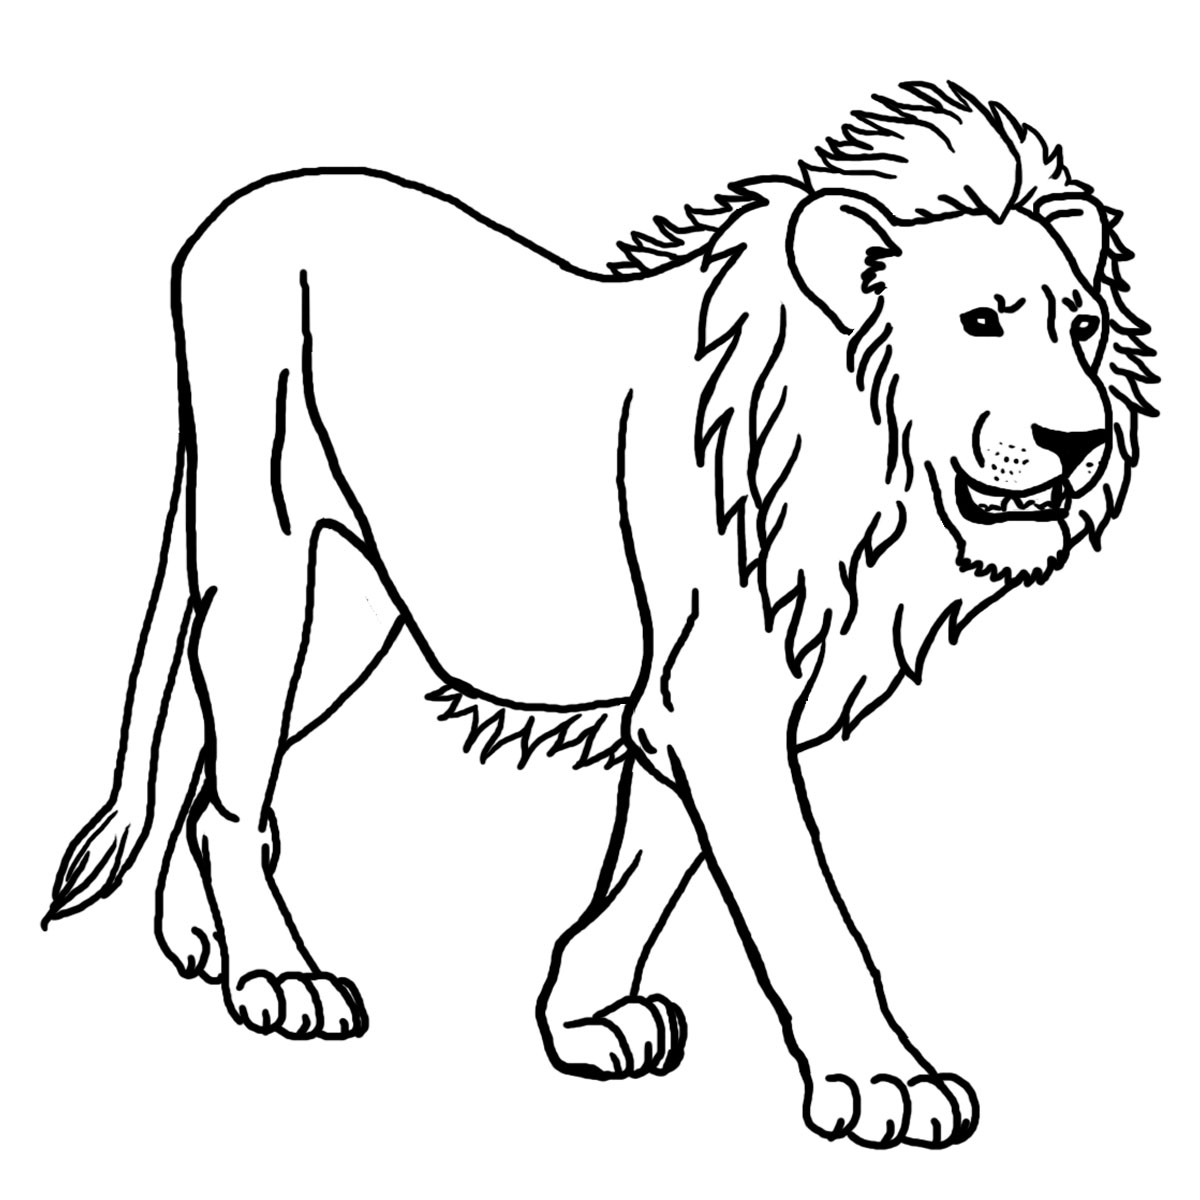 Simple Lion coloring page for kids